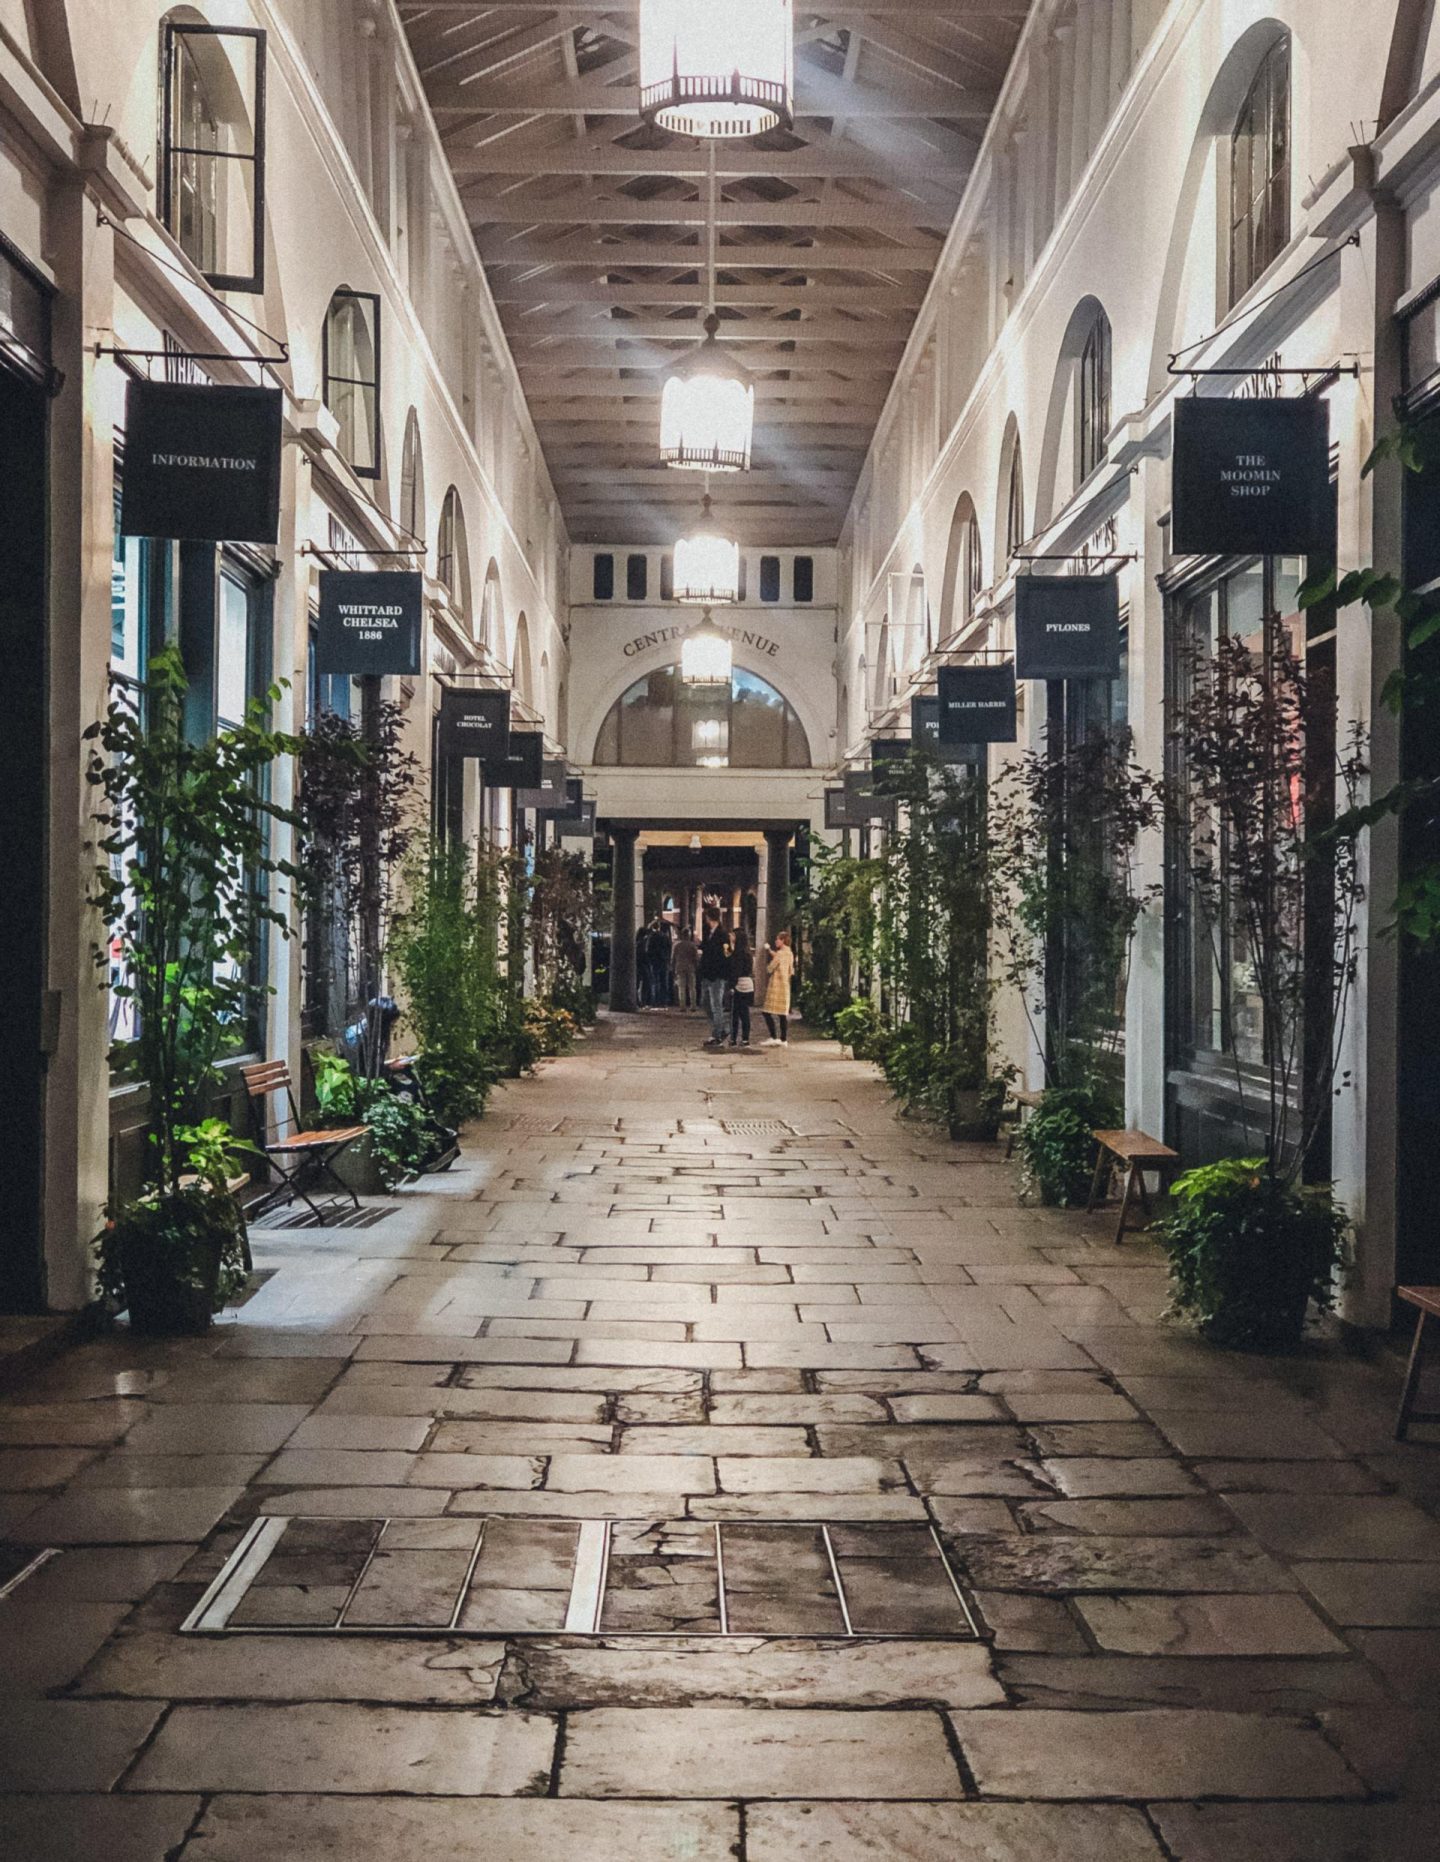 My travel guide to Covent Garden, London